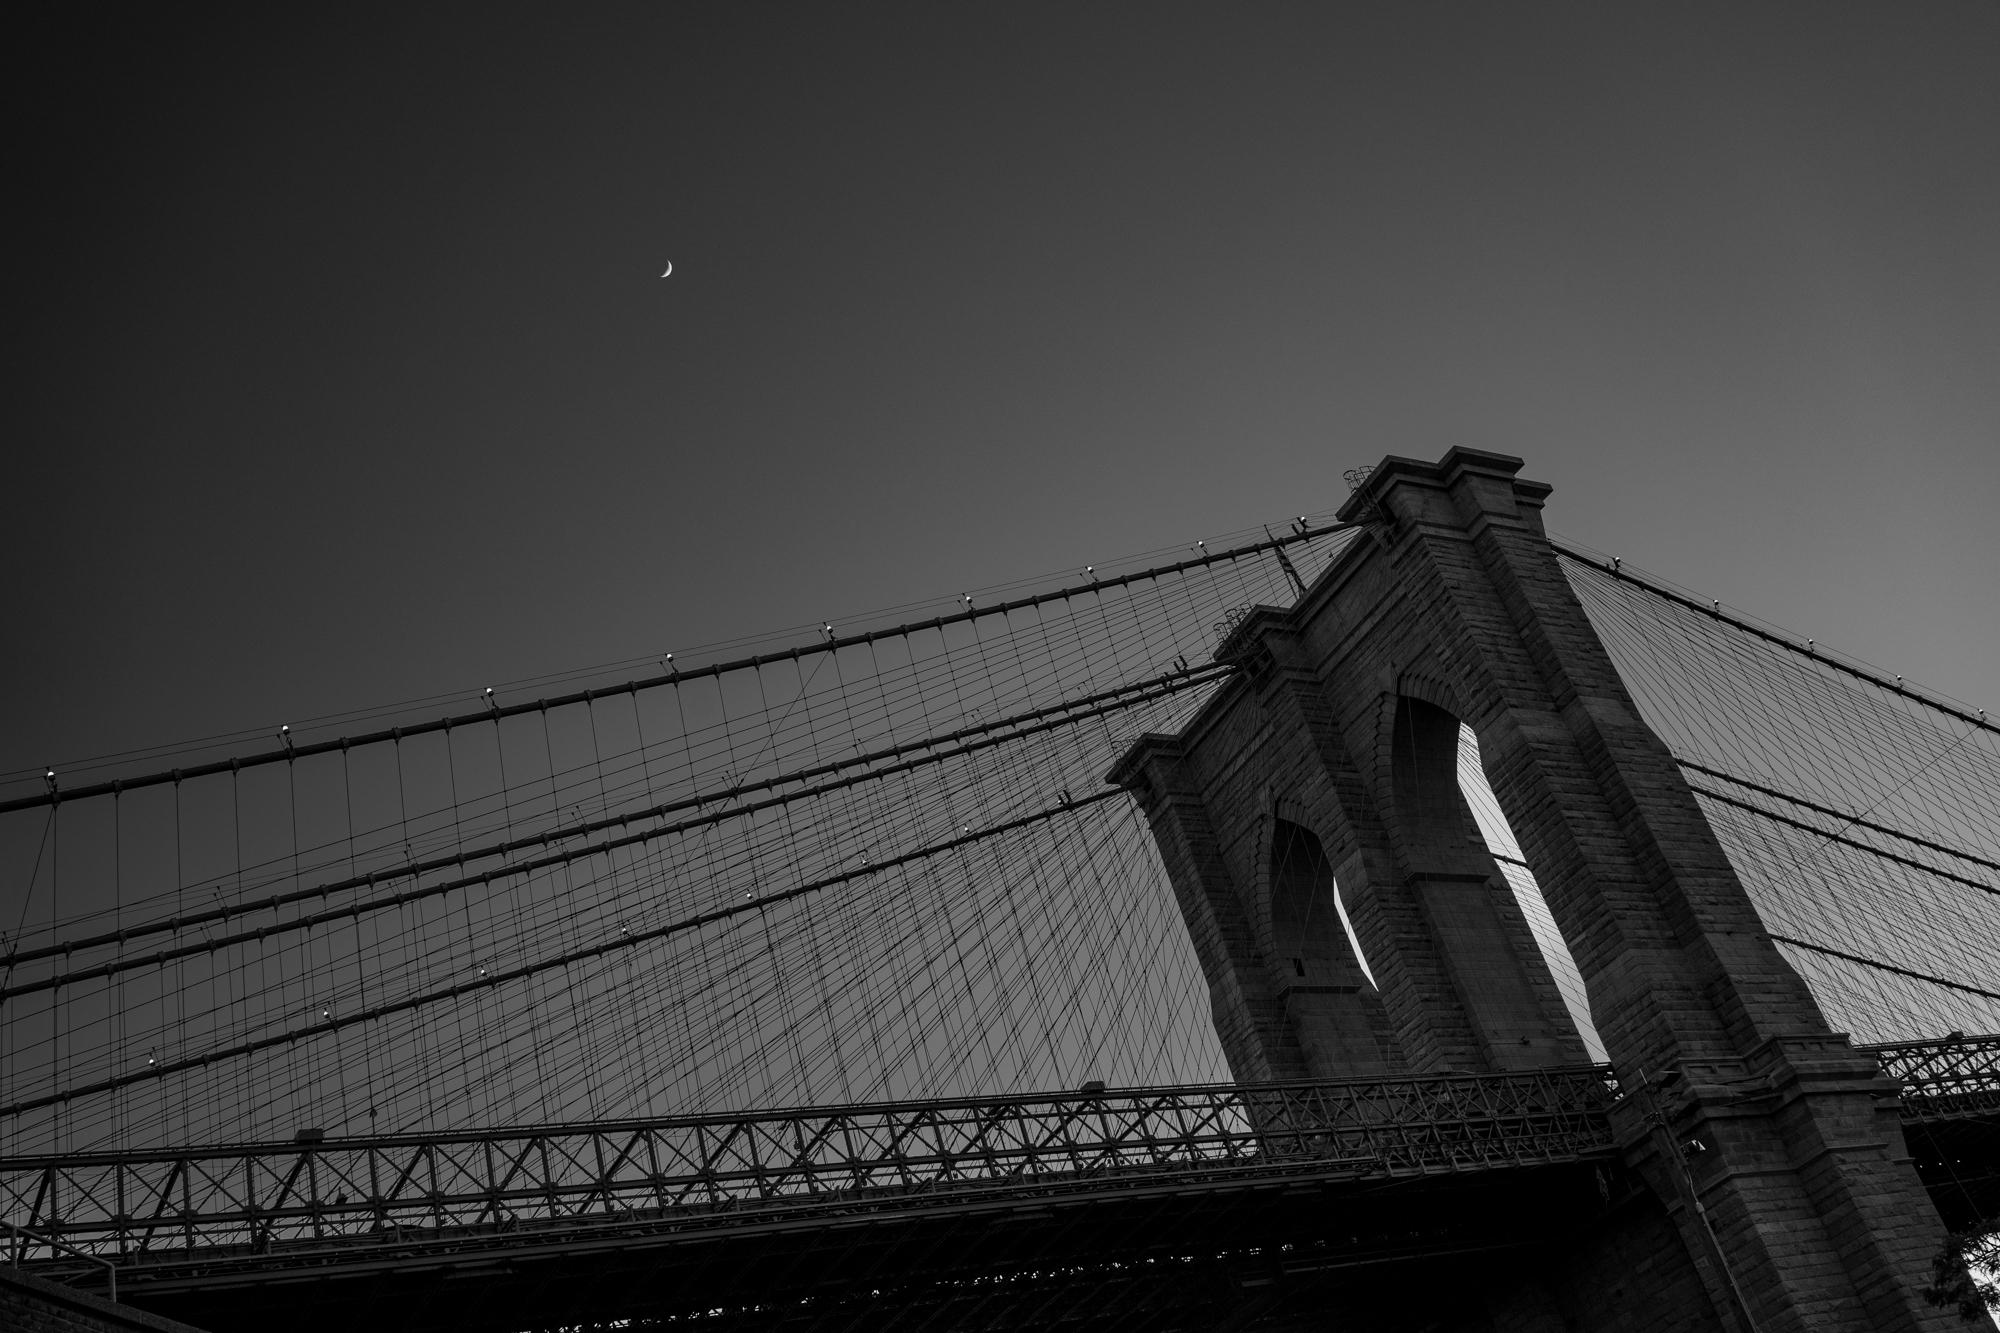   Limited Edition Black and White Photograph - Moon over Brooklyn, 2022. Taken in the NYC borough of Brooklyn at the base of the Brooklyn Bridge.

About Howard Lewis:
Lewis’ artistic practice often explores science, engineering, technology, and